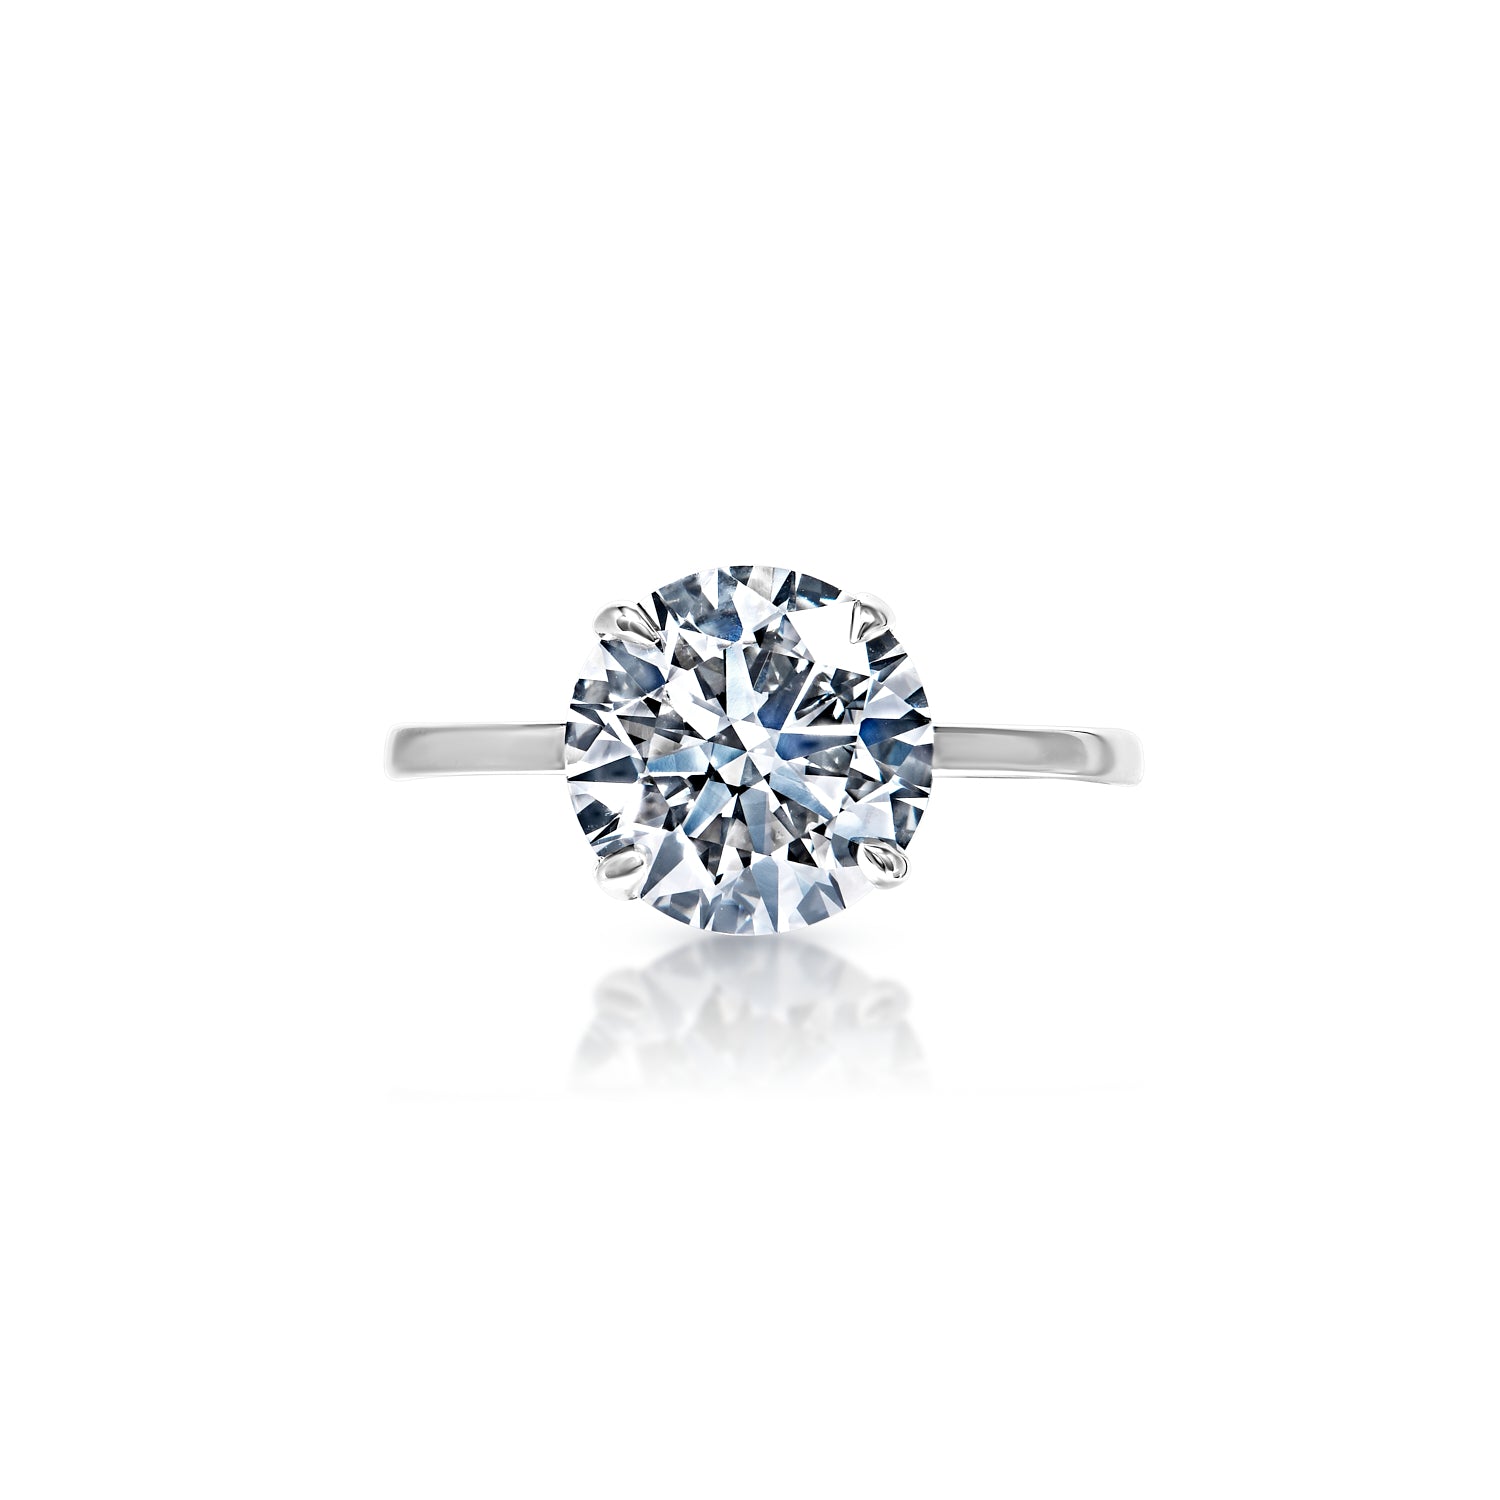 Leura 2 Carat G VS1 Round Brilliant Diamond Solitaire Engagement Ring in 14k White Gold Front View